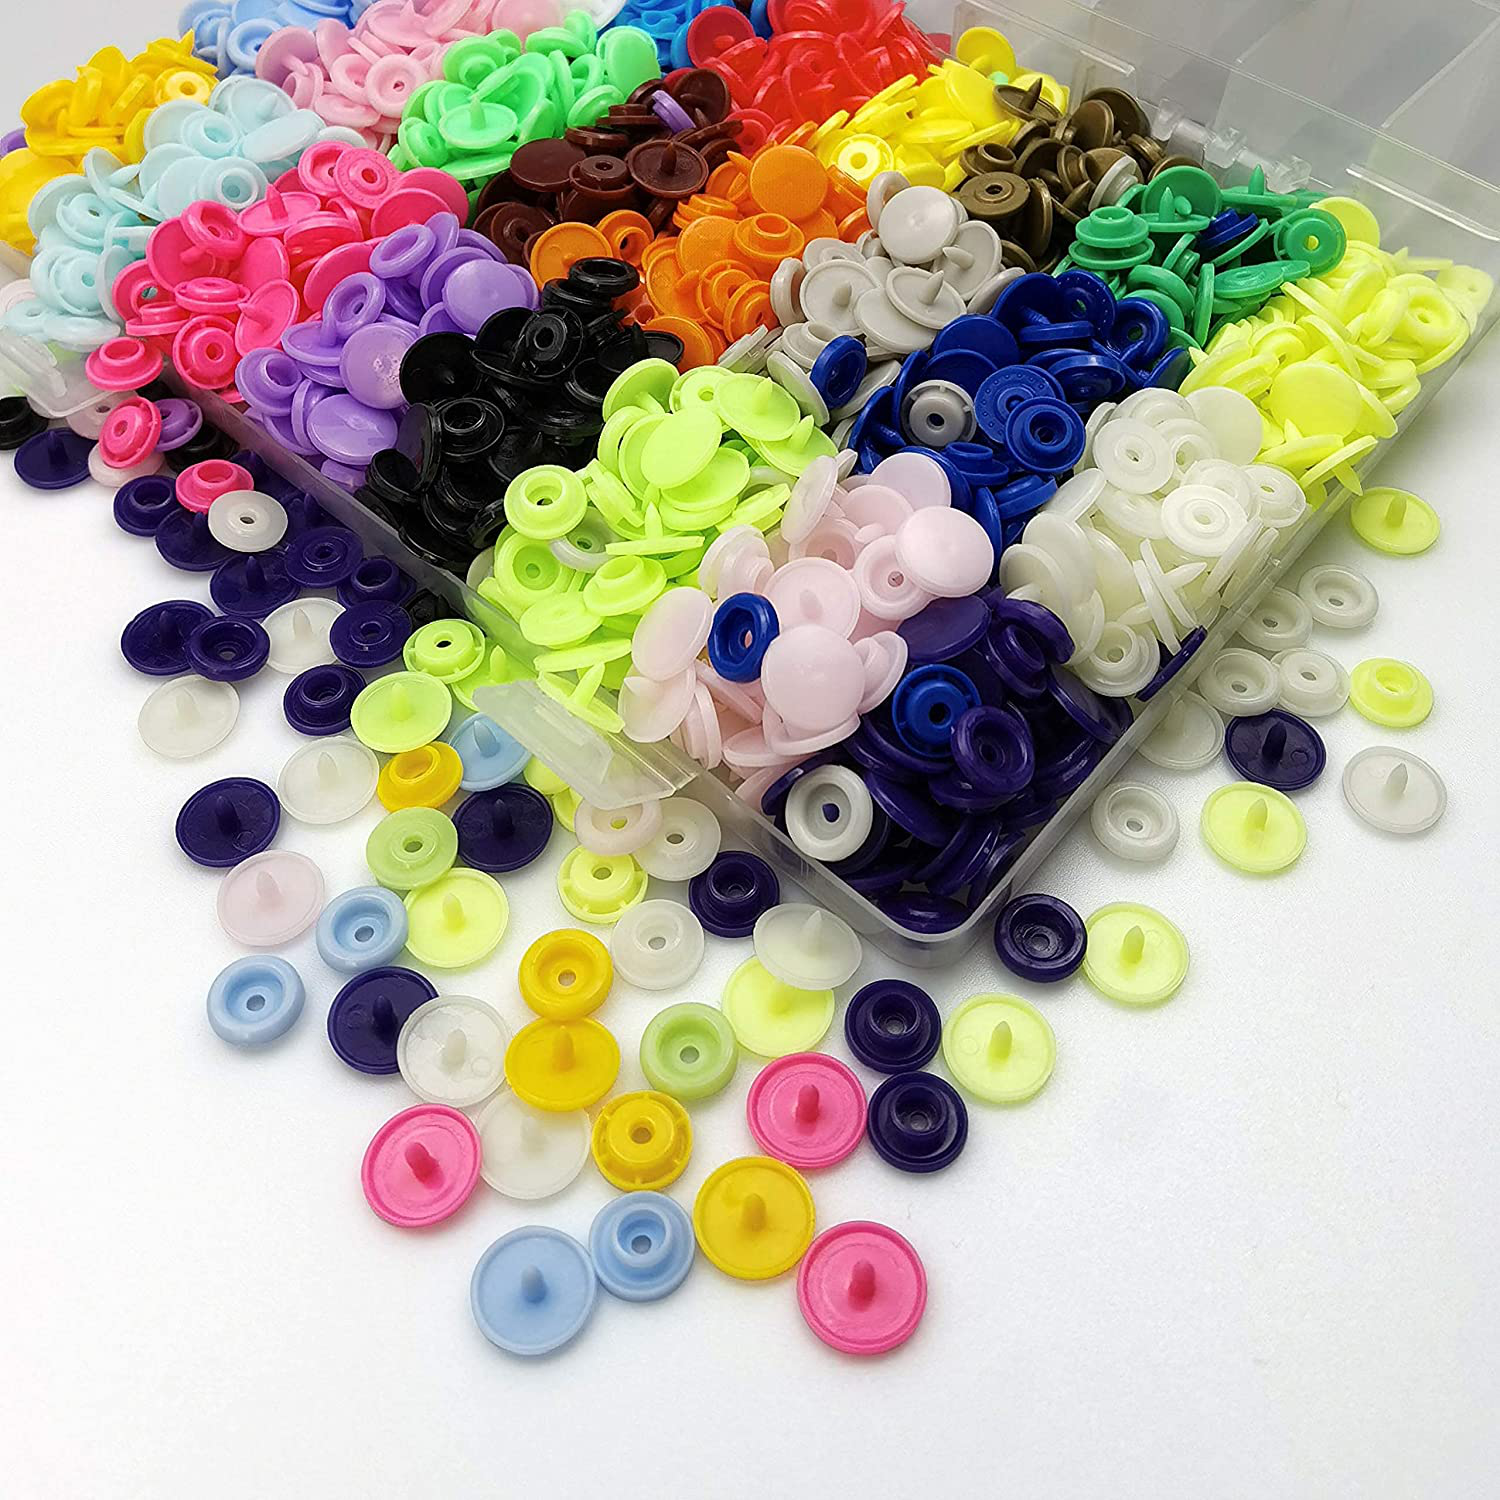 TmppDeco Plastic Snaps w Snap Pliers 460 Piece 24 Colors Sewing